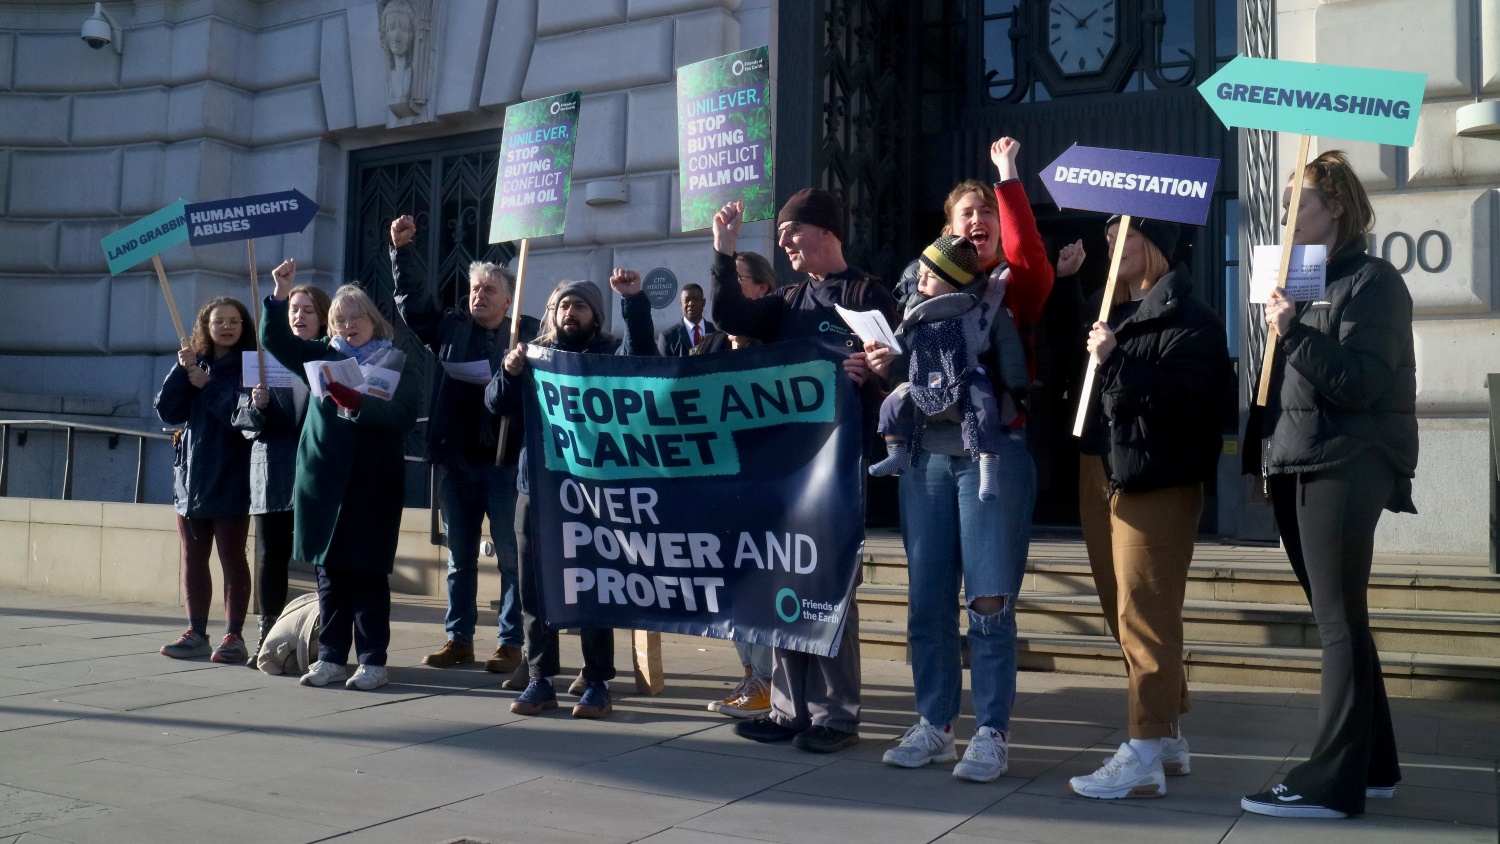 Image of activists holding banners at protest targeting Unilever